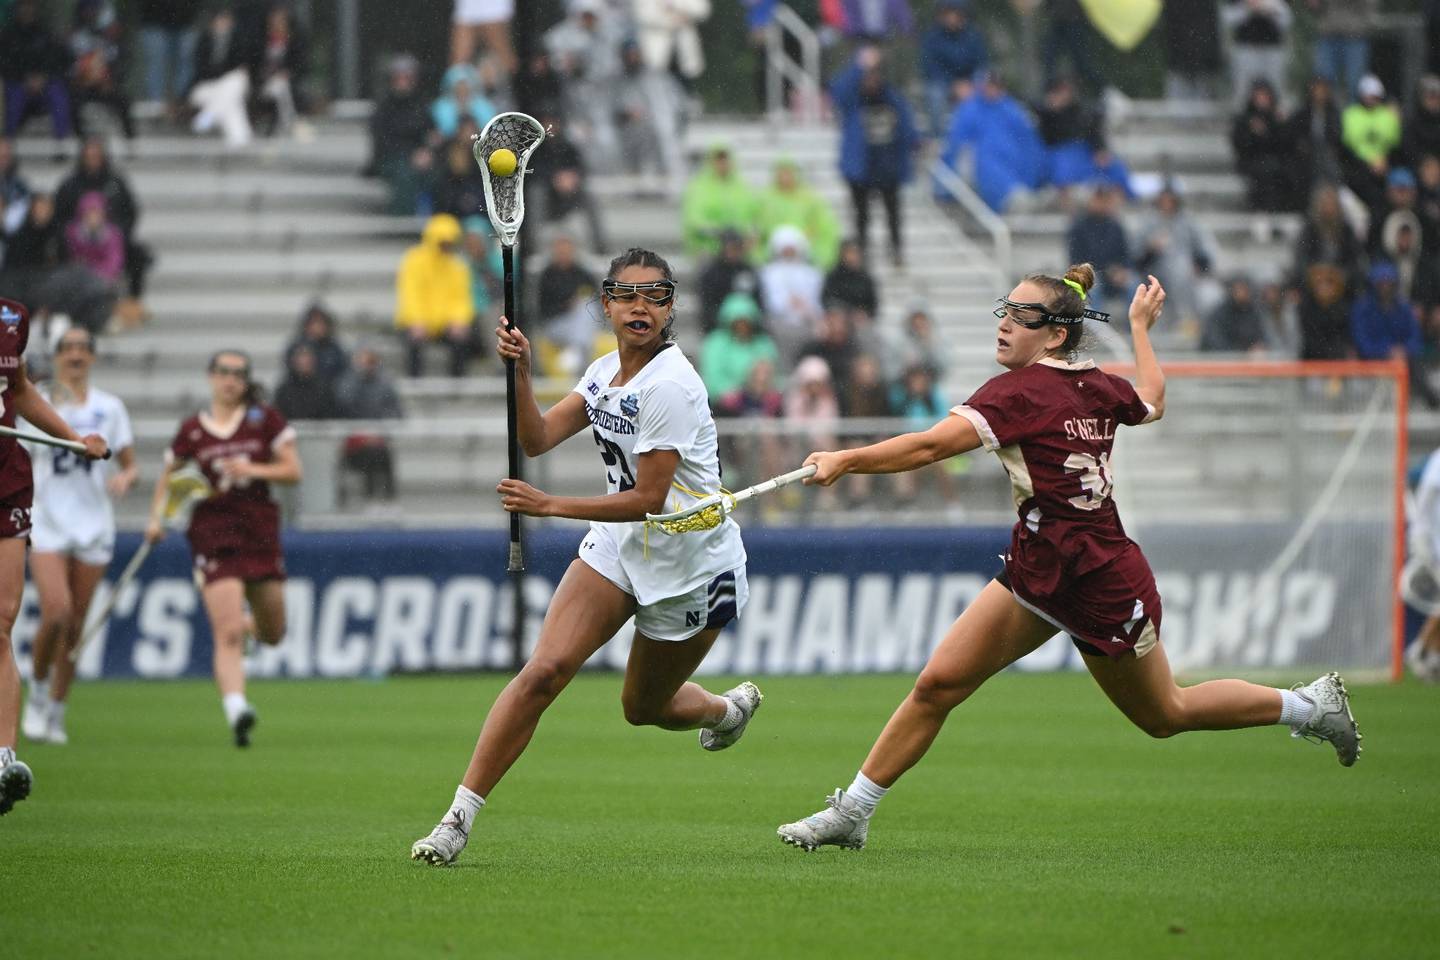 Sammy White, a Timonium native who played at Dulaney, maneuvers past a Boston College player in the Division I women's lacrosse national championship game in Philadelphia. White and Northwestern won, 18-6.